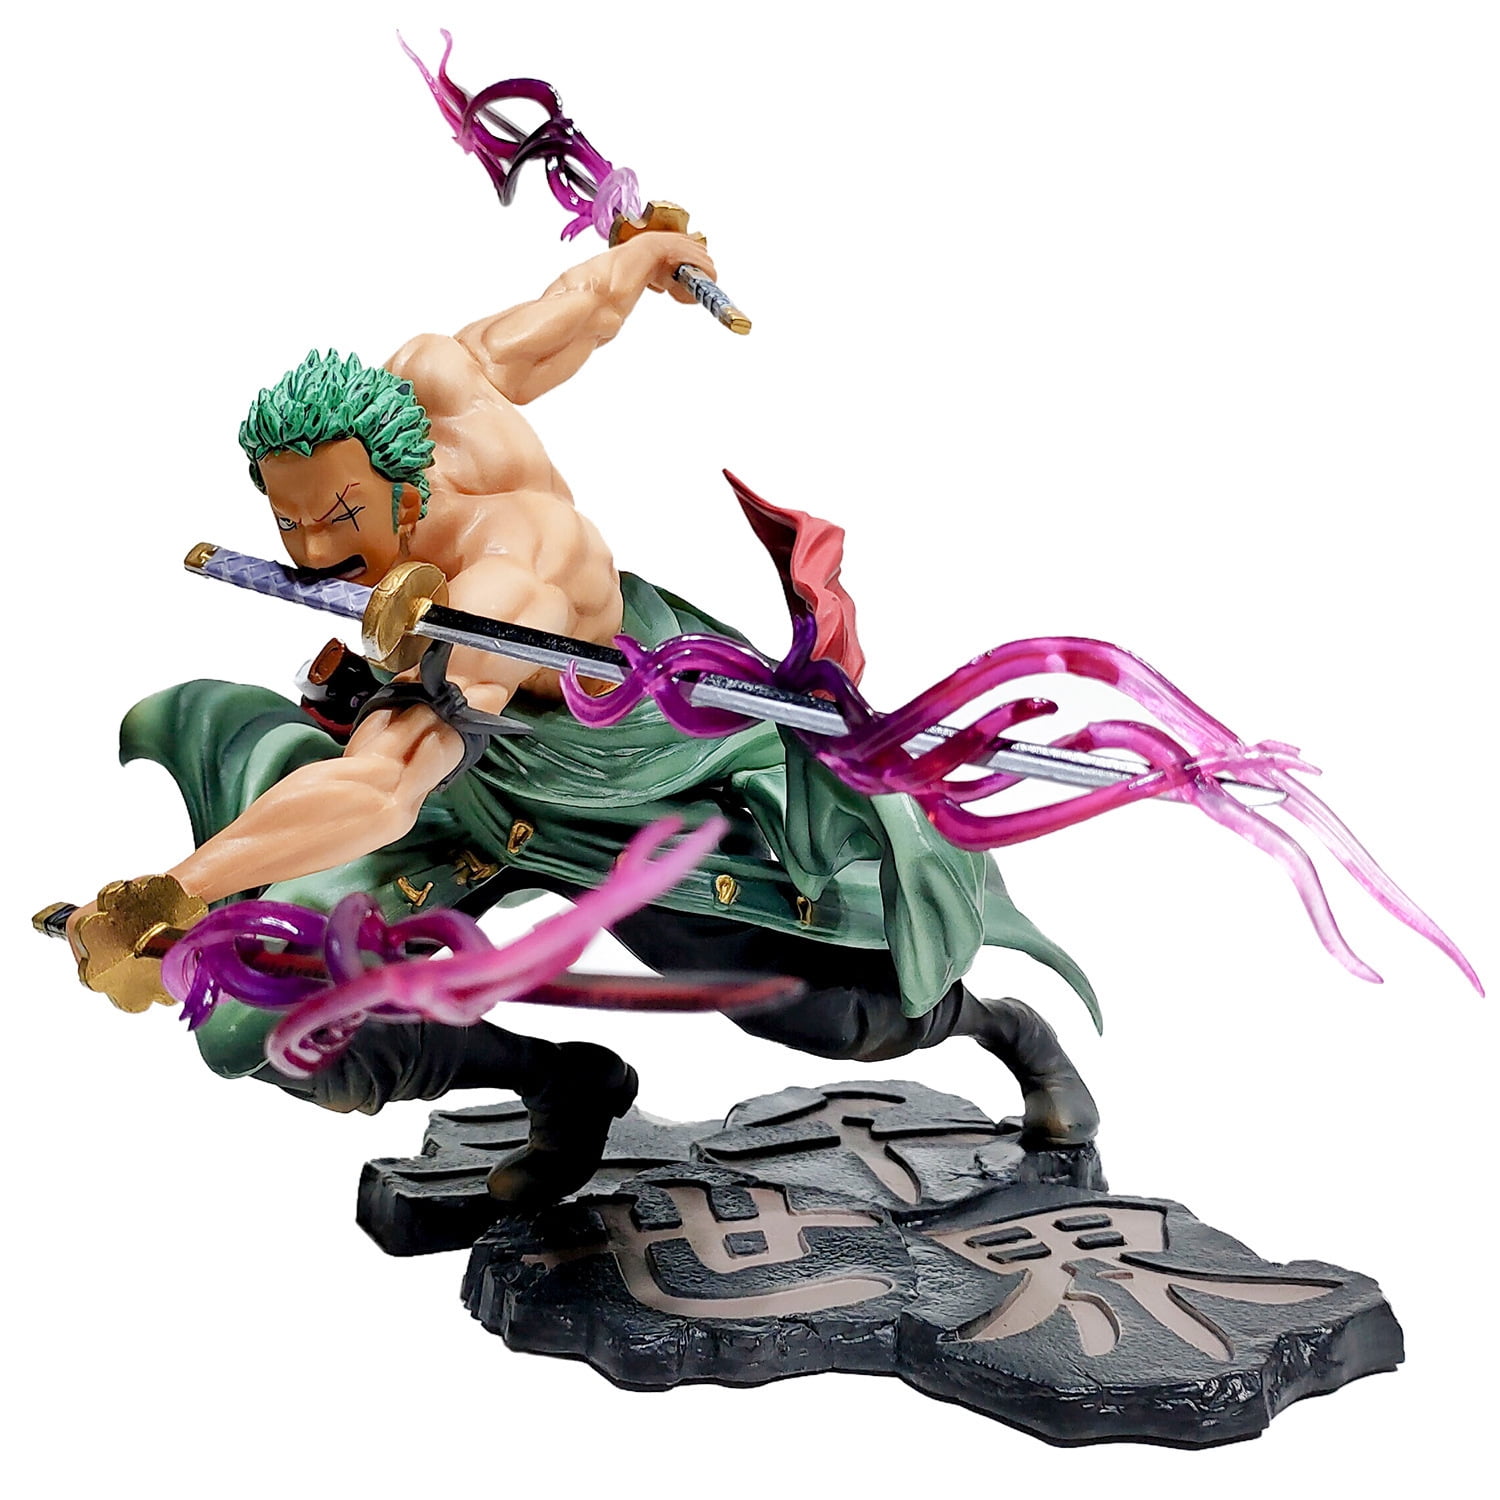 One Piece Zoro with Sword 3000 Worlds Action Anime Action Figure